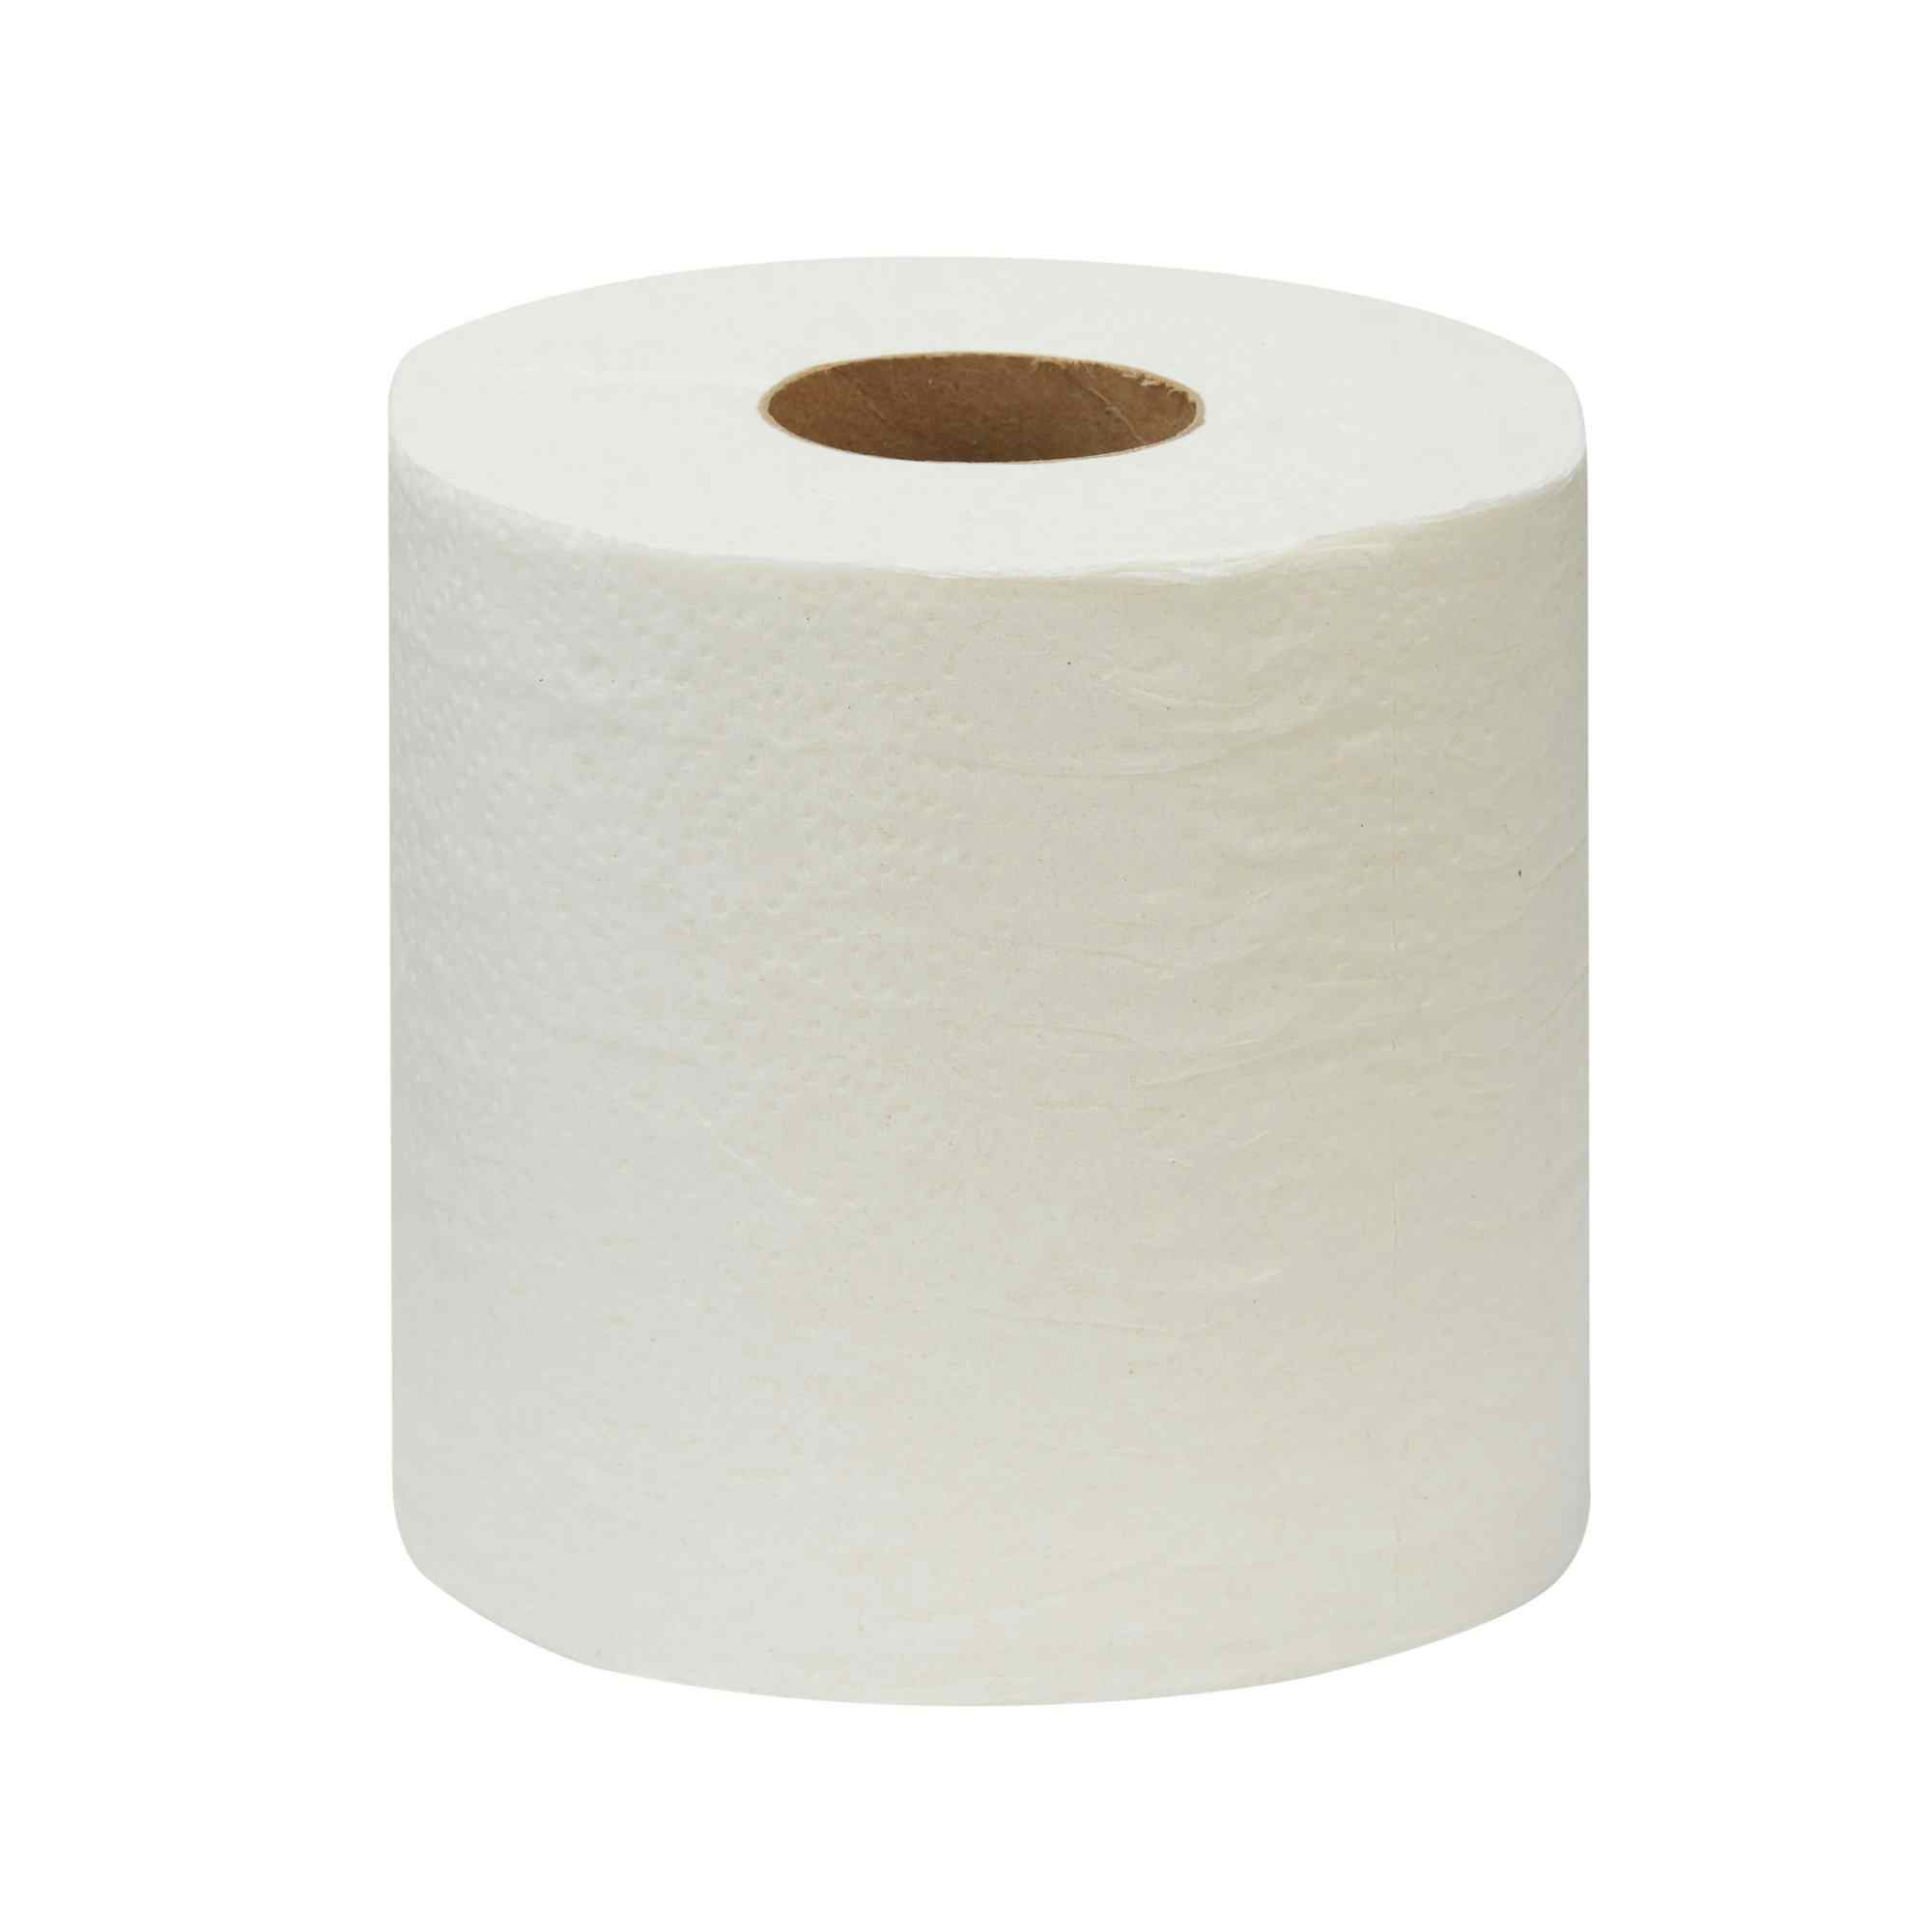 Image of Scott Essential Toilet Tissue product front